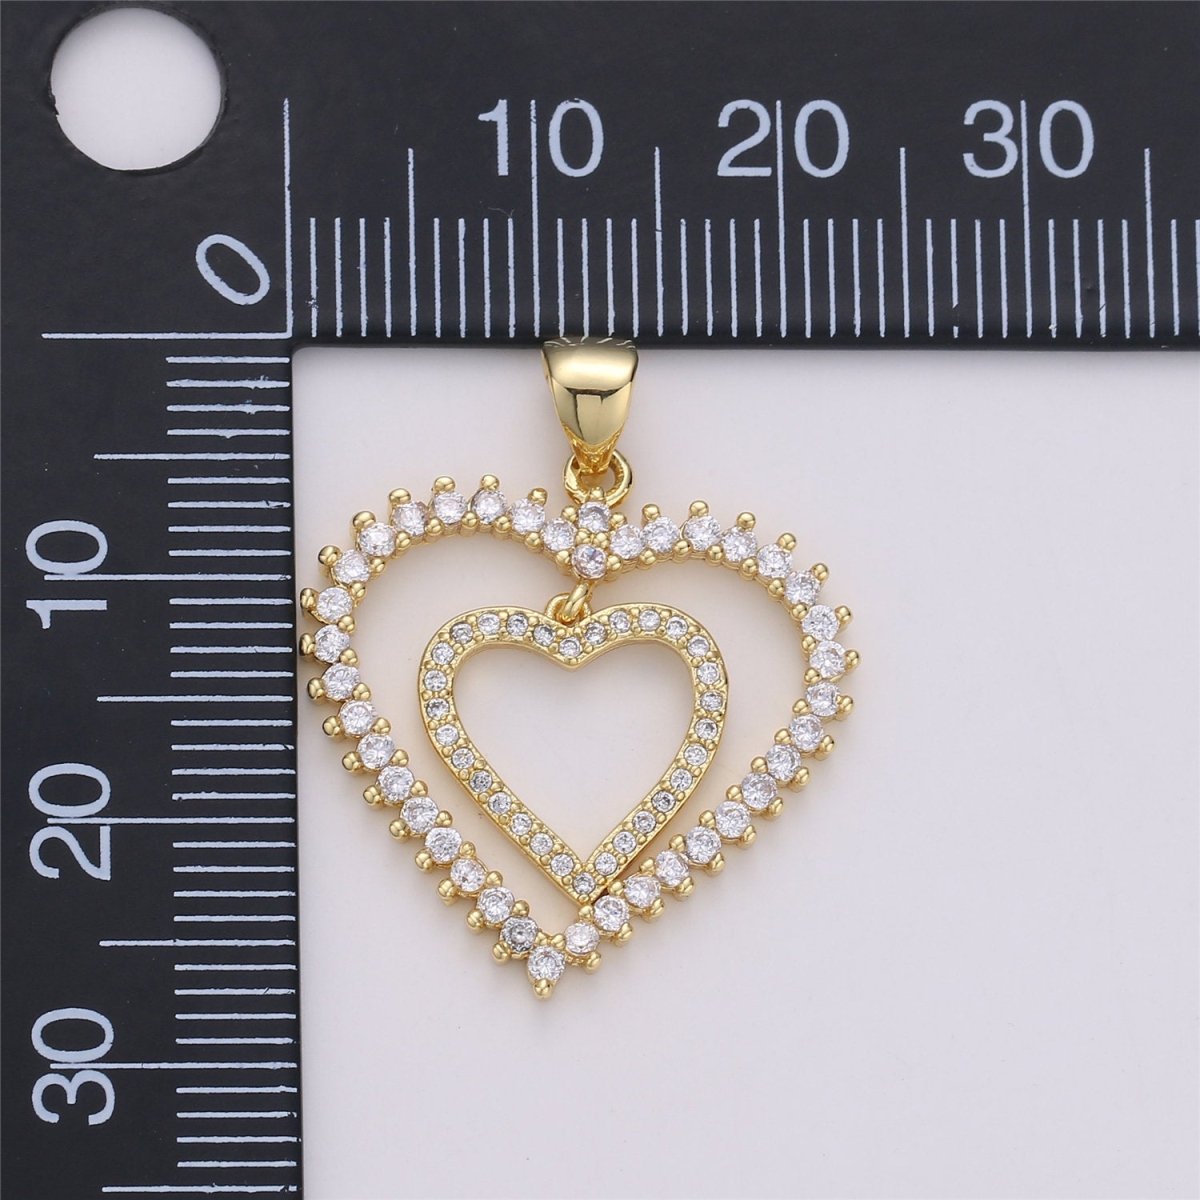 24K Gold Filled Dainty Dangle Twin Heart Pendant with Micro Pave Cubic Zirconia CZ Stone for Family Lover Necklace or Bracelet I-594 - DLUXCA